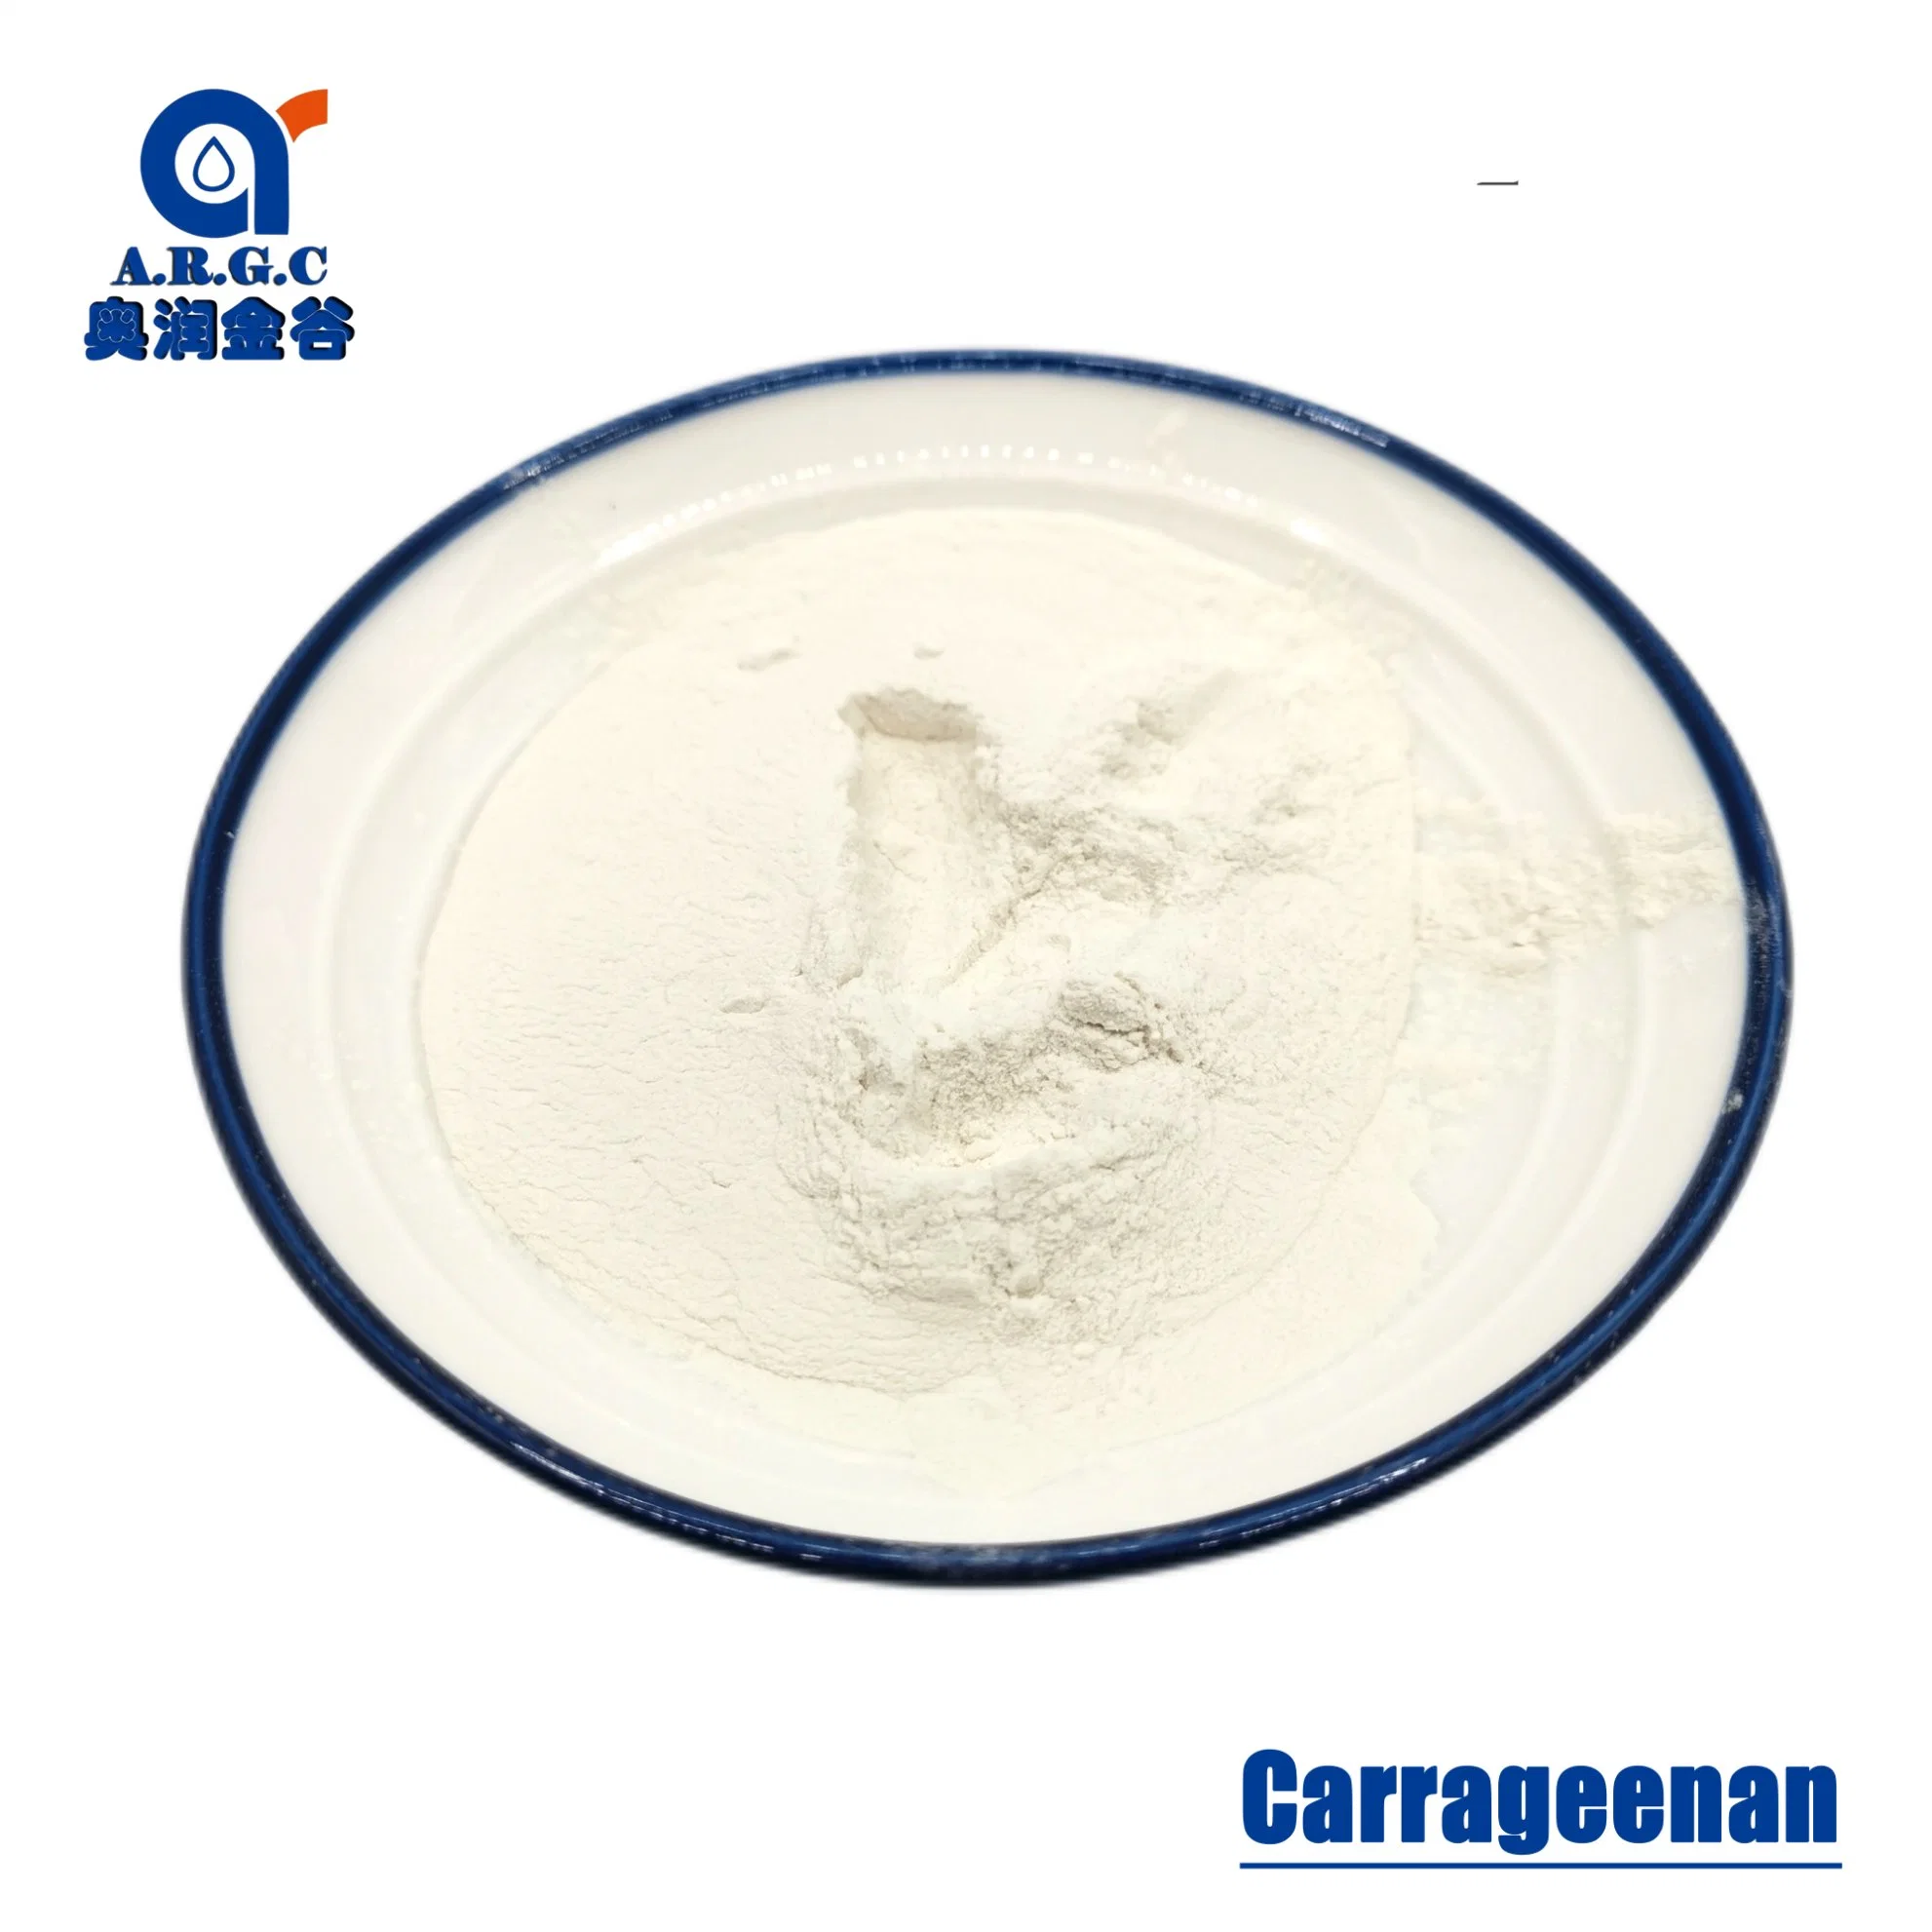 Argc Fast Delivery Carrageenan Refined Carageenan/Semi-Refined Carrageenan